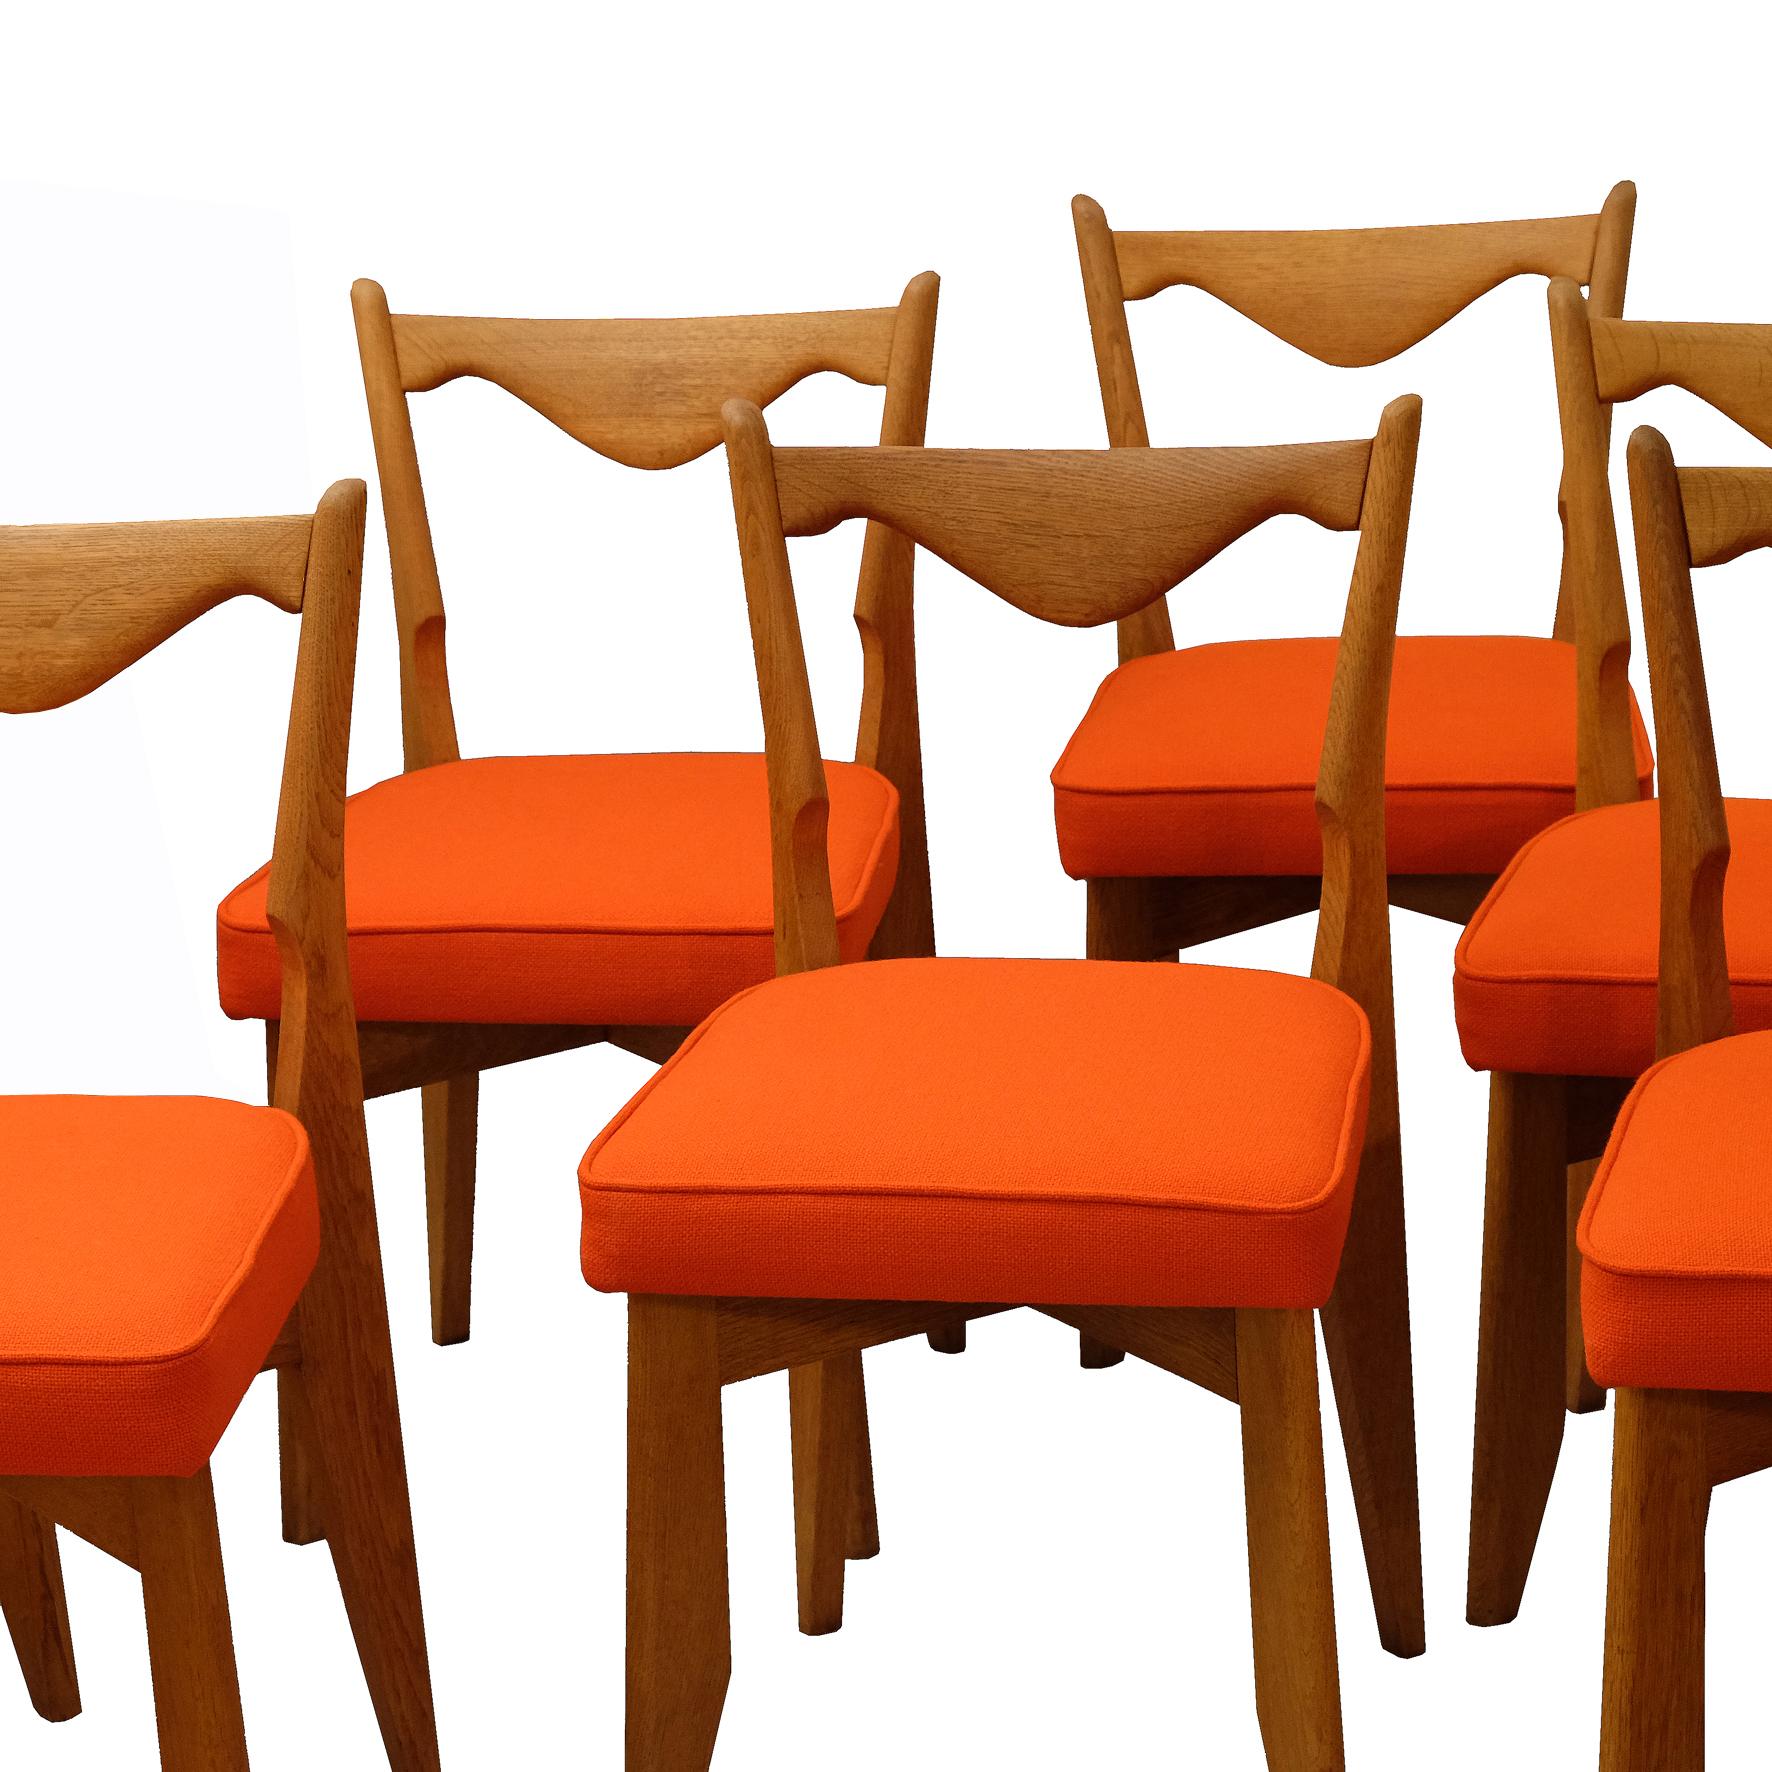 A set of six carved oak chairs.
The seat cushions covered with orange wool fabric.
The four saber shaped feet joined by a crosspiece under the seat.

These beautiful pieces by the acclaimed pair of French designers were perfectly reupholstered